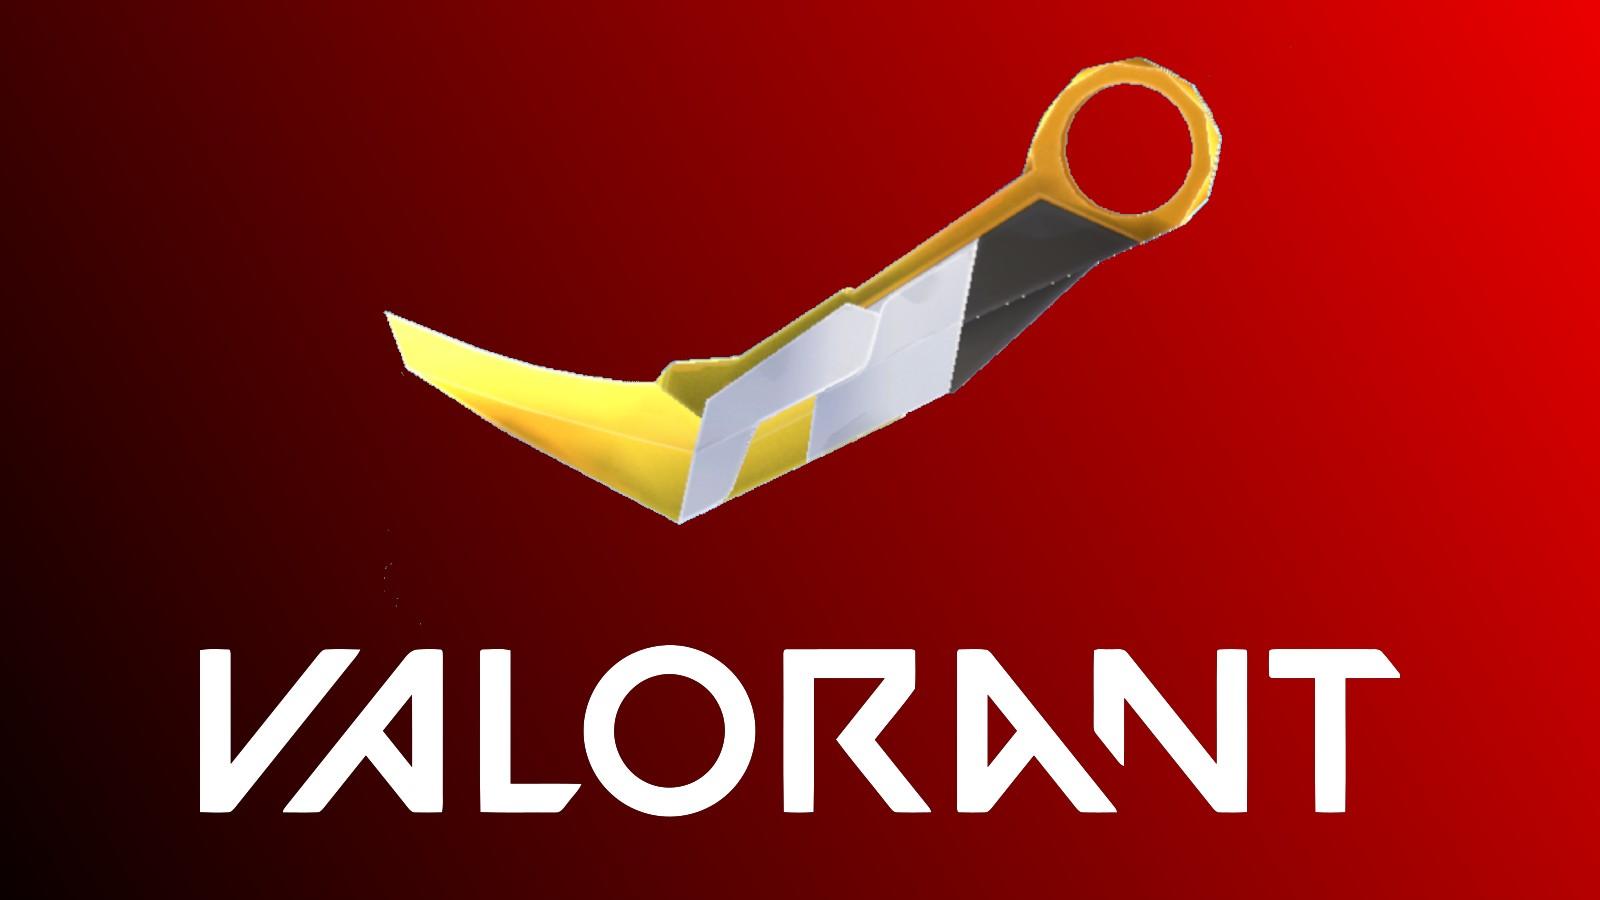 VALORANT - Get prepped. Link your VALORANT and  accounts and unlock  in-game items with Prime.